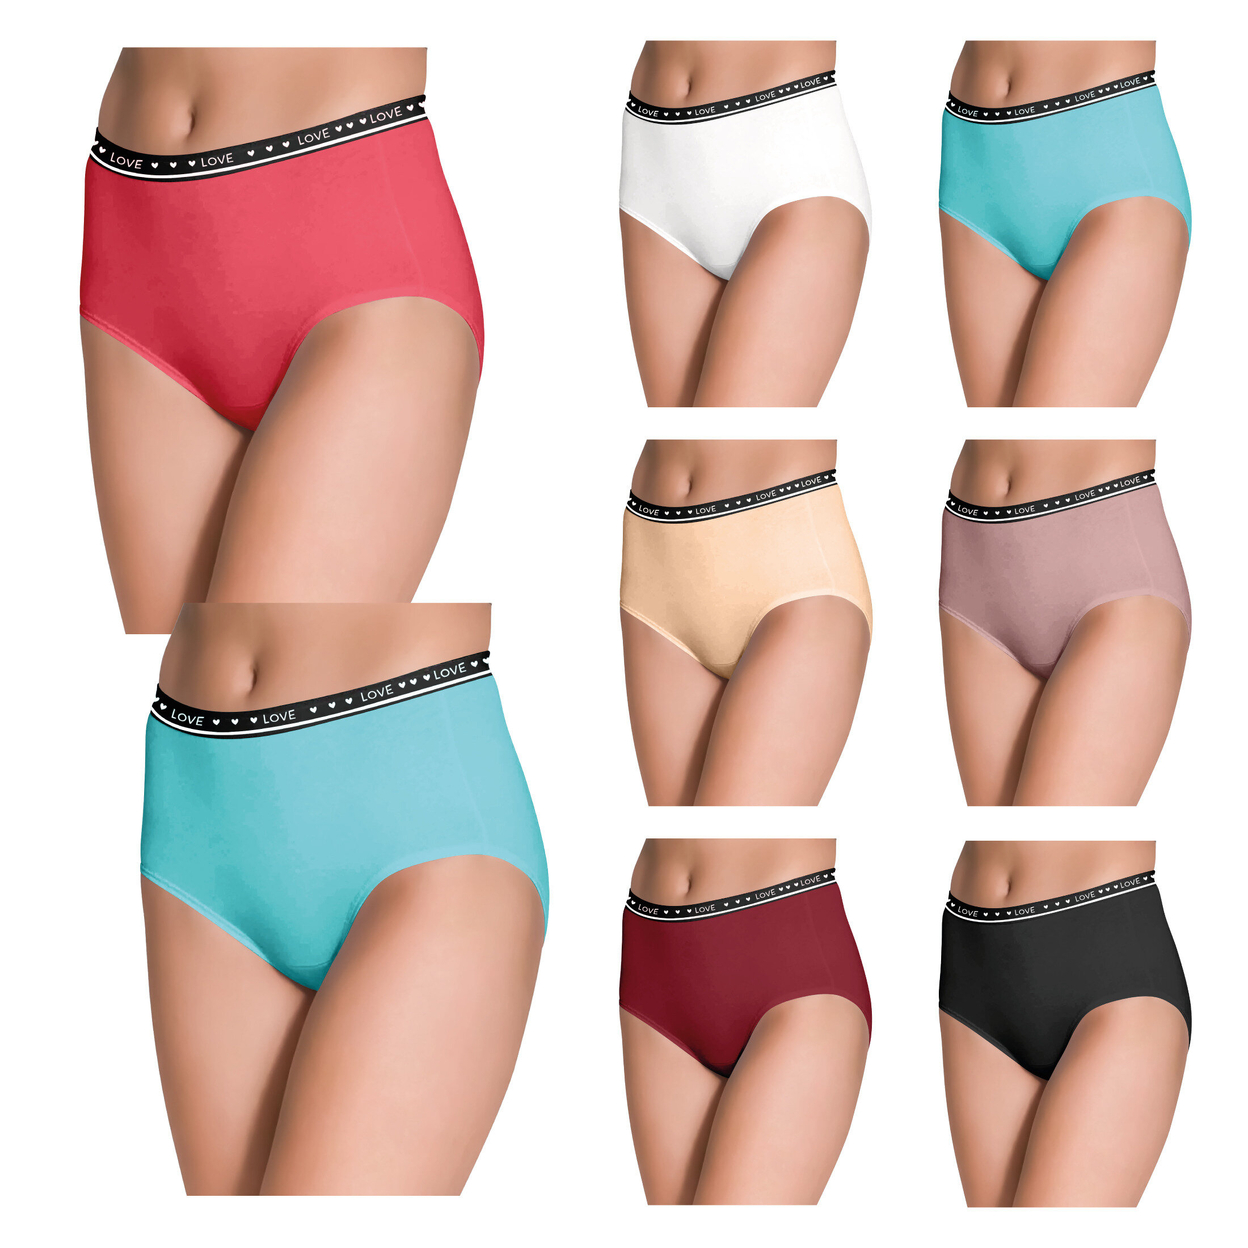 Multi-Pack: Women's Ultra Soft Moisture Wicking Panties Cotton Perfect Fit Underwear (Plus Sizes Available) - 12-Pack, Medium